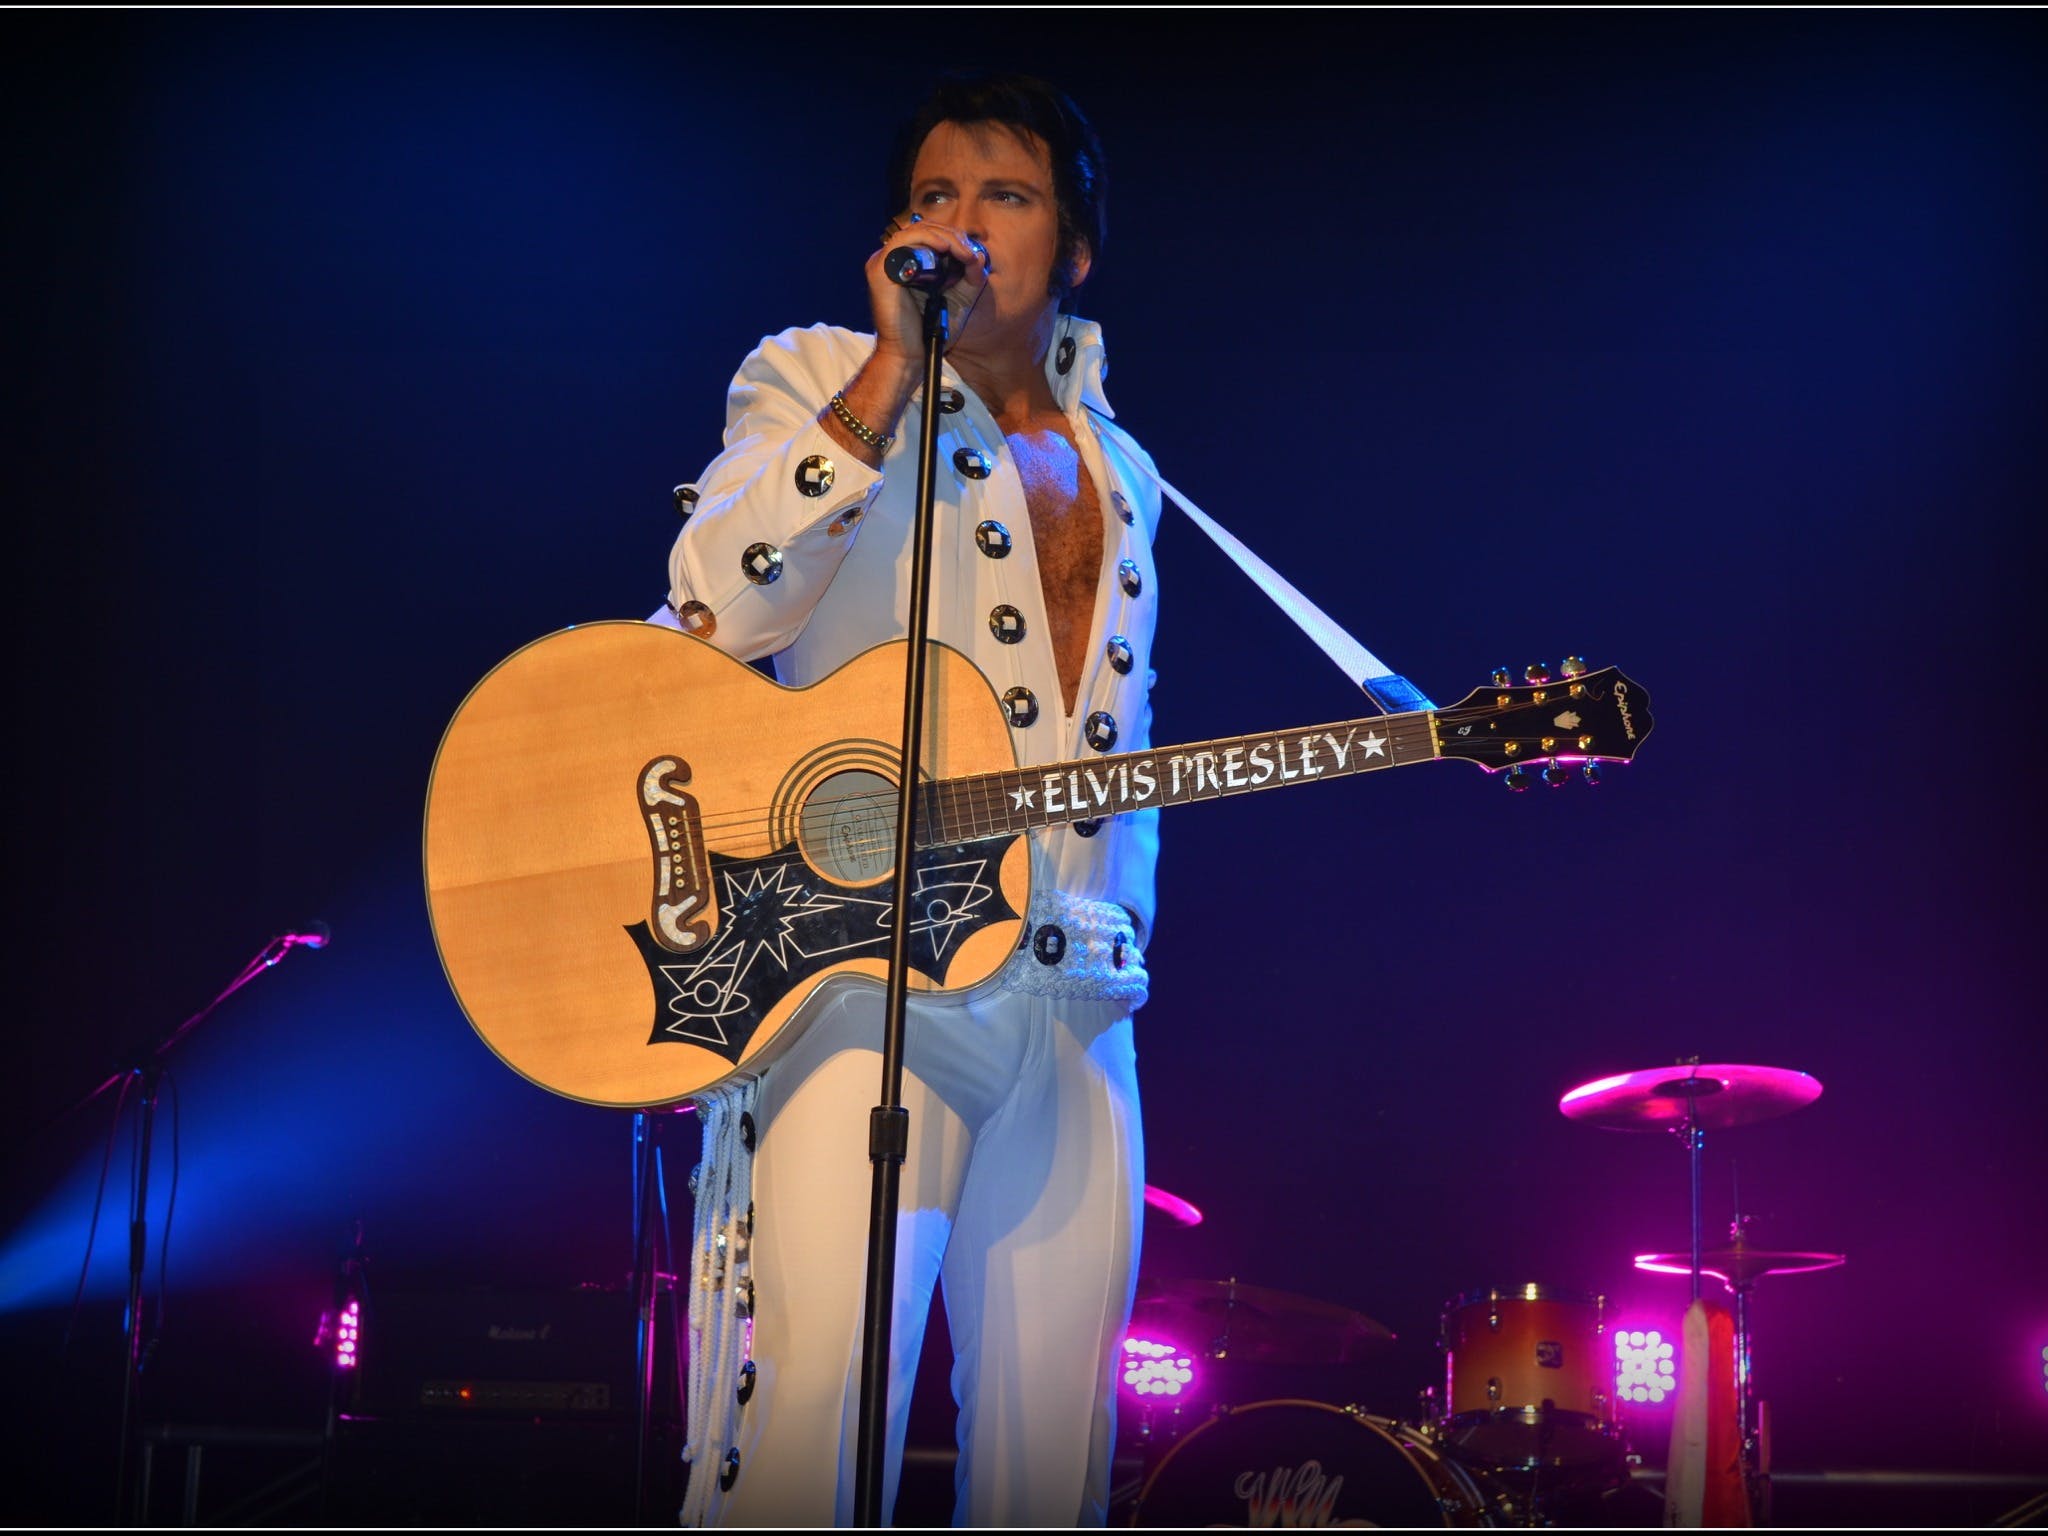 Elvis Forever - Damian Mullin 'Up Close and Personal' - Townsville Tourism